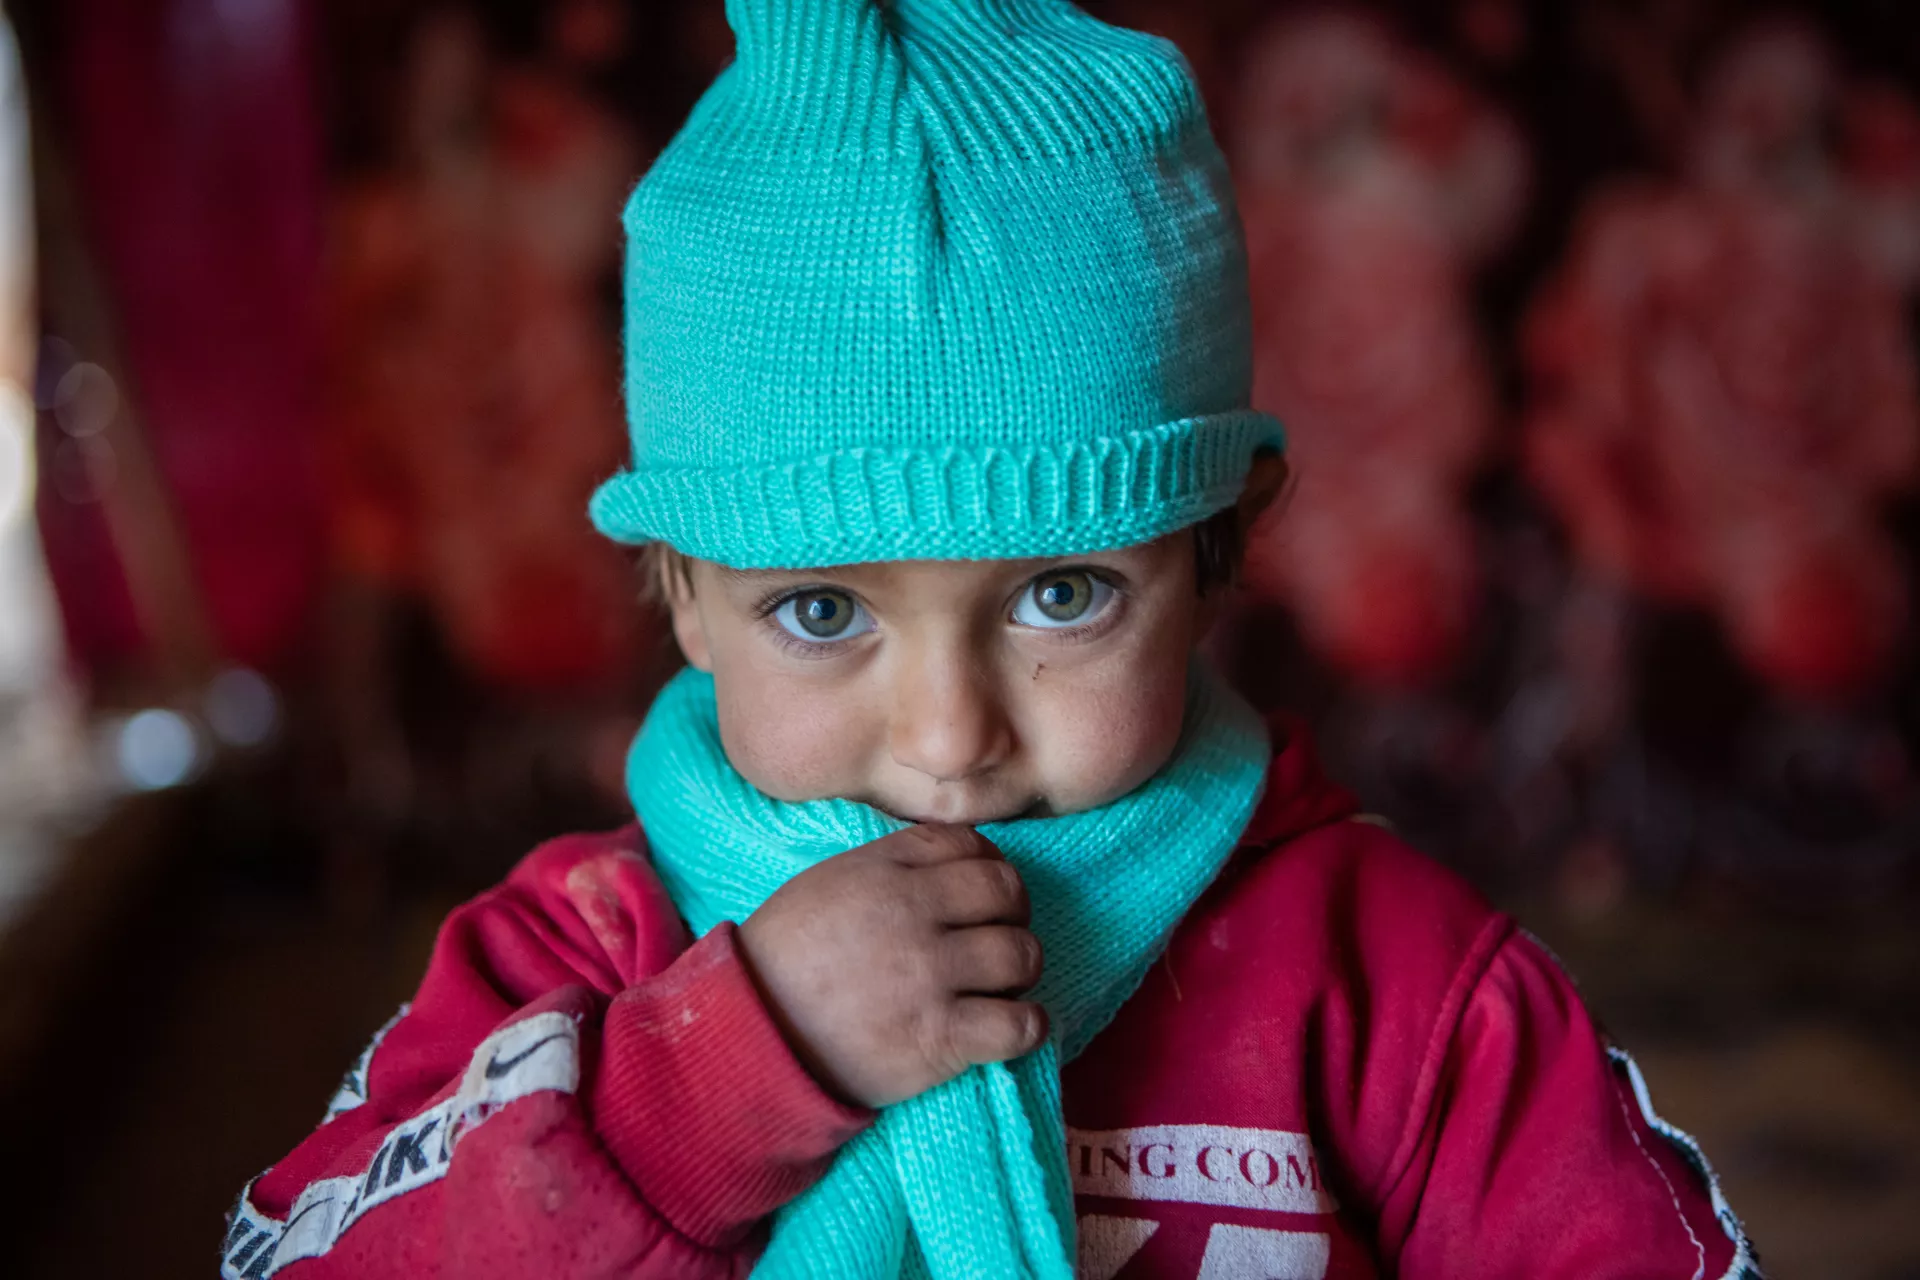 On 22 January 2022, three-year-old Kawthar wears her new woollen hat and scarf, received as part of the winter clothing kits UNICEF distributed in Alzhourieyh makeshift camp, east rural Homs, Syria.